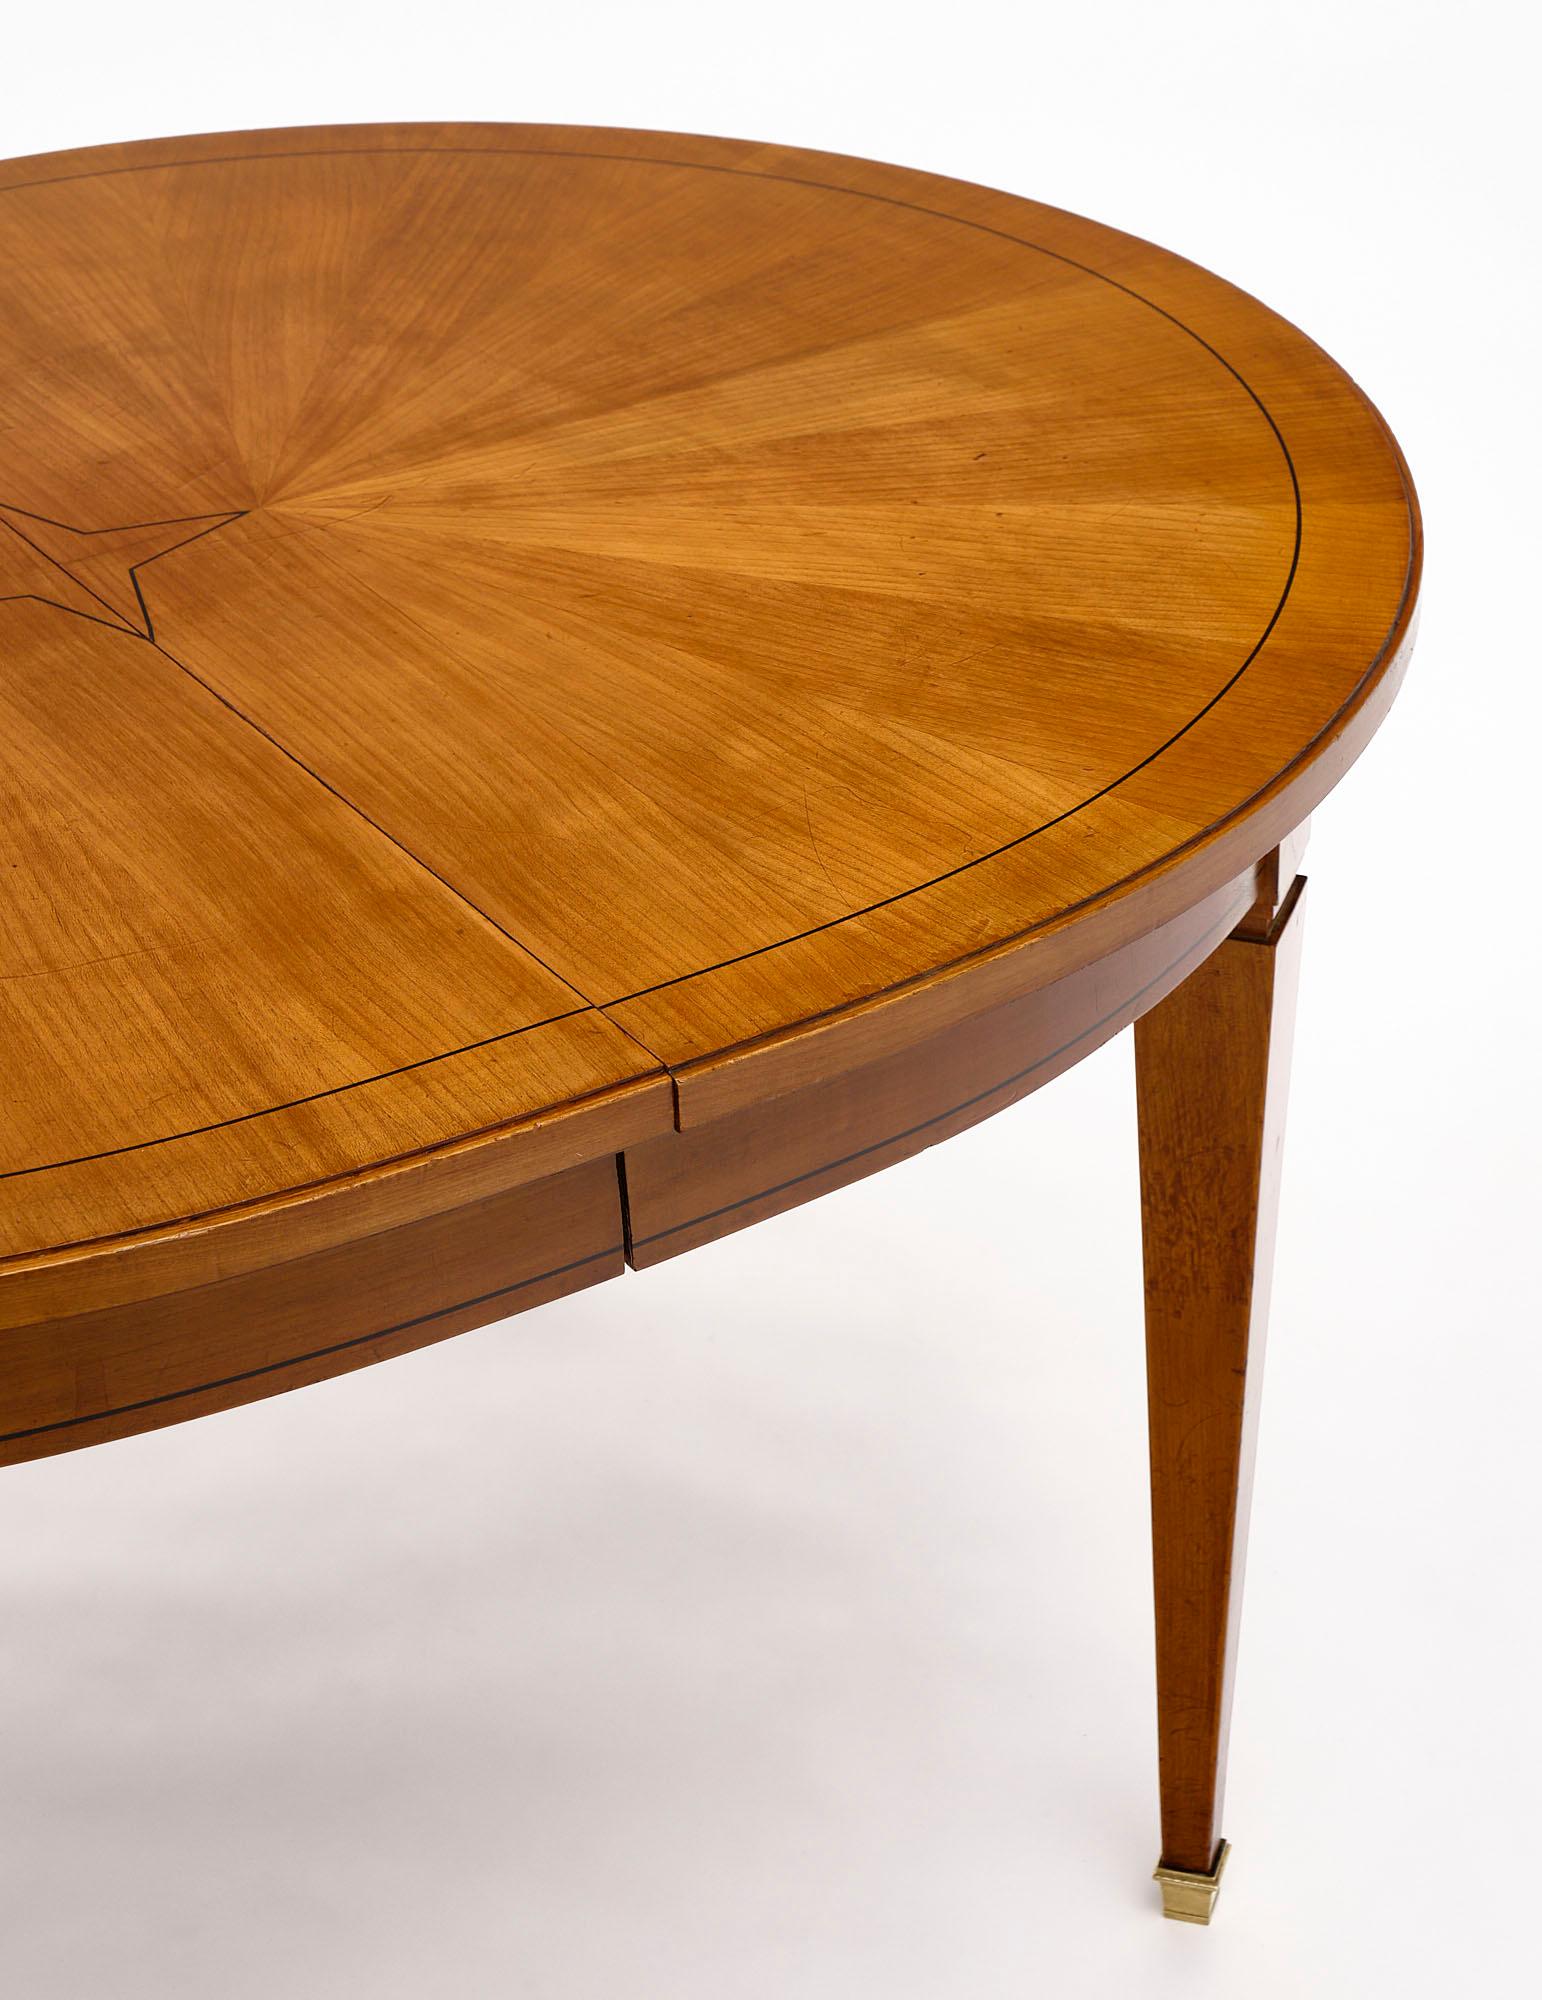 Directoire style dining table from France made of solid cherrywood and featuring a sun marquetry with ebony inlays. There are two solid cherrywood leaves as well; each adding 19.625” to the total length. The feet are capped with brass.